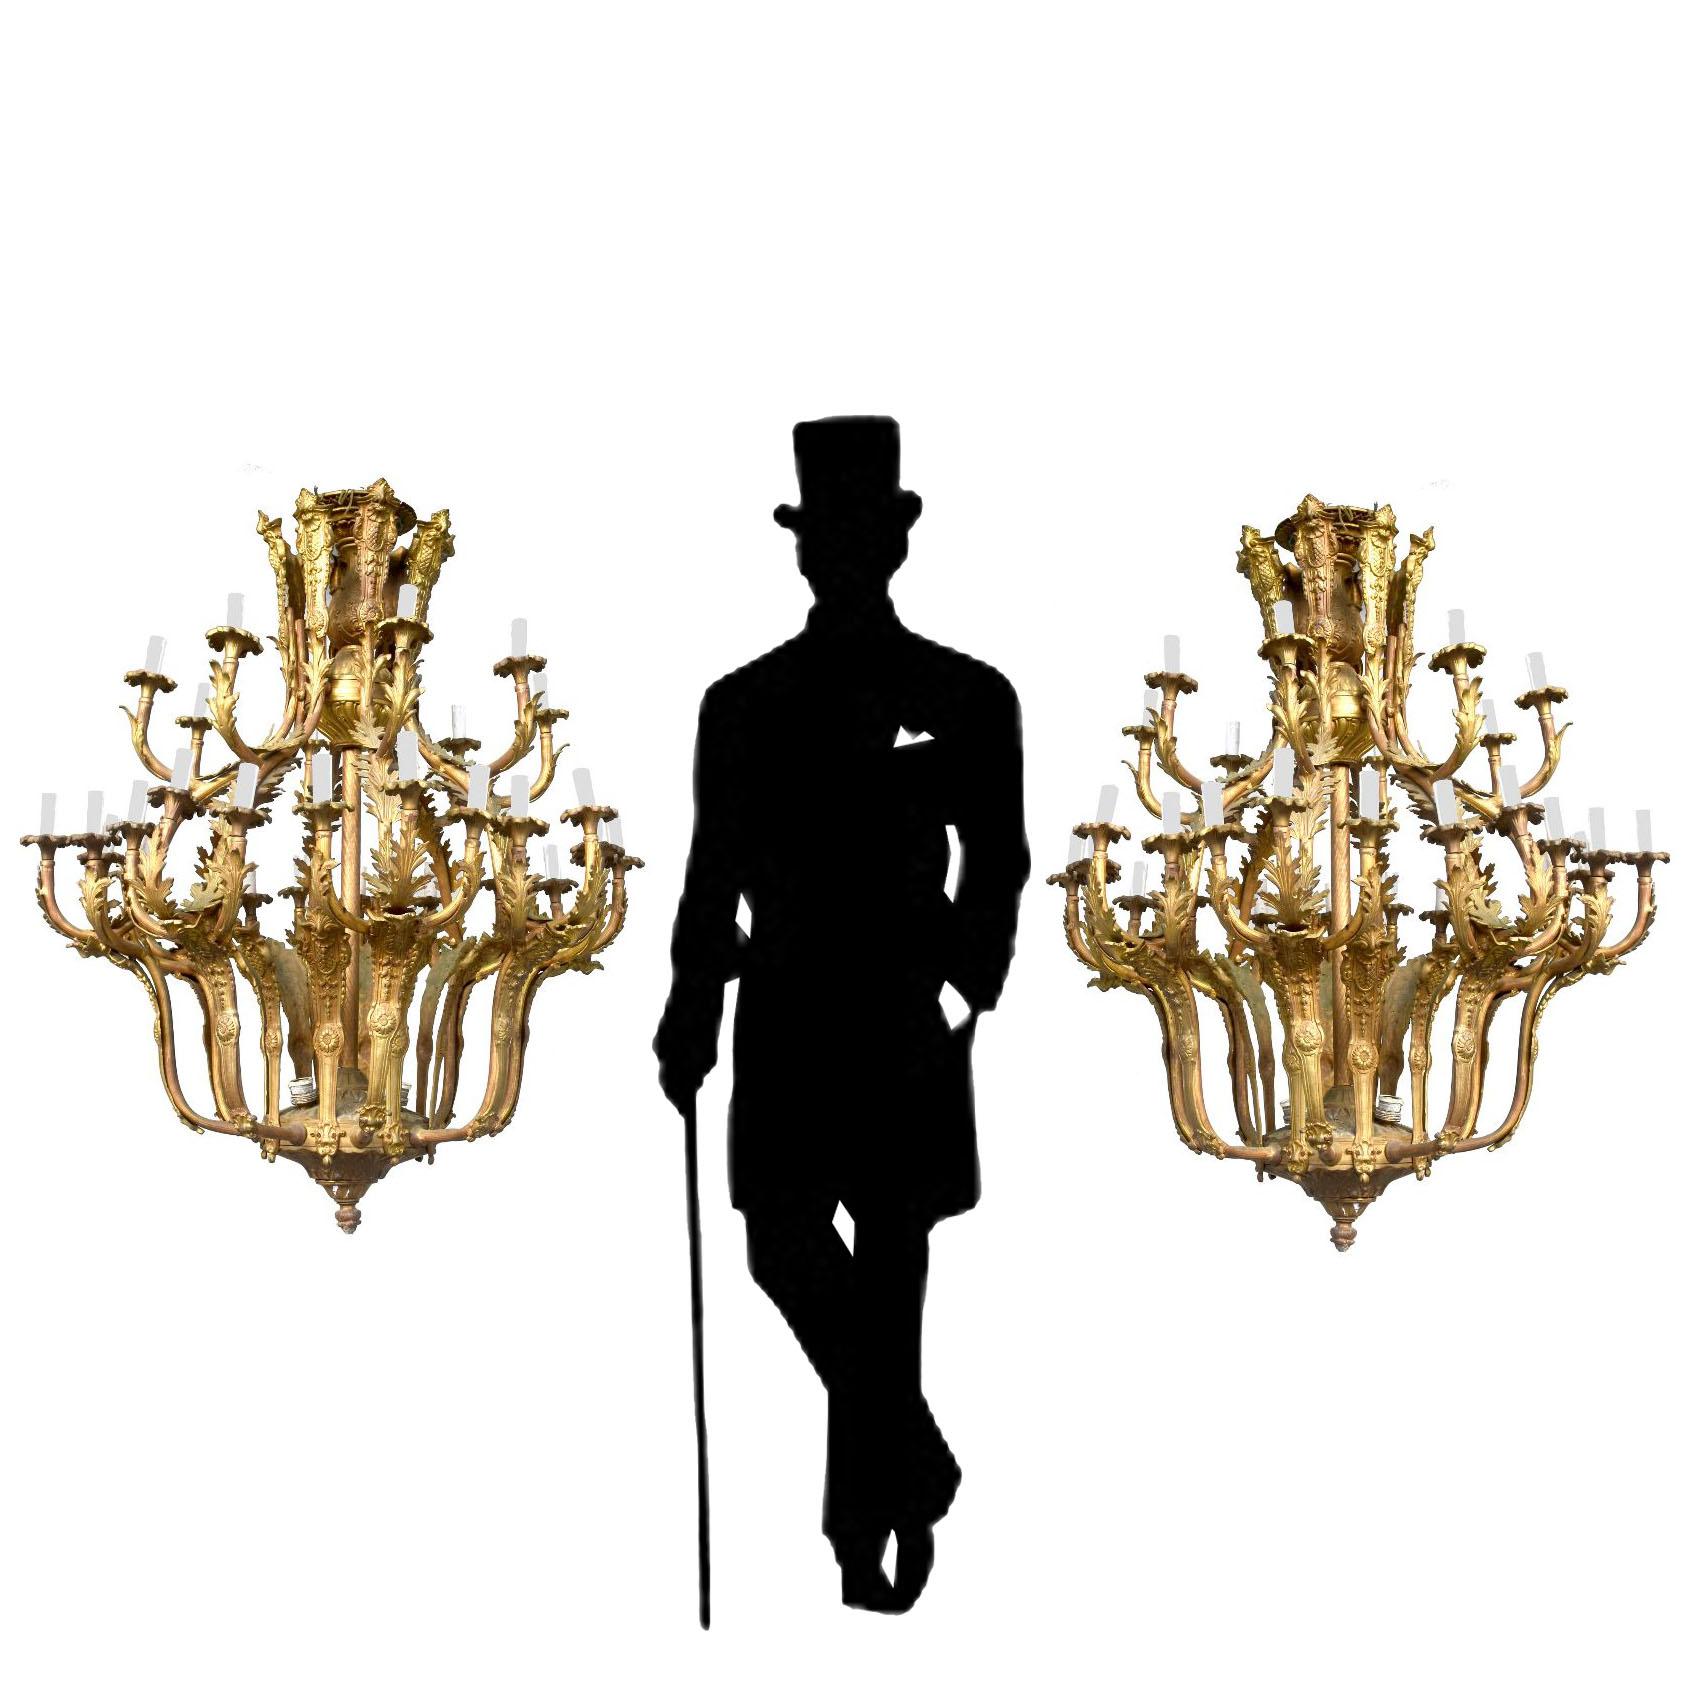 Spectacular pair of Louis XV style chandeliers, gilt bronze, 36 lights, approximately height 115 cm, diameter 95 cm.